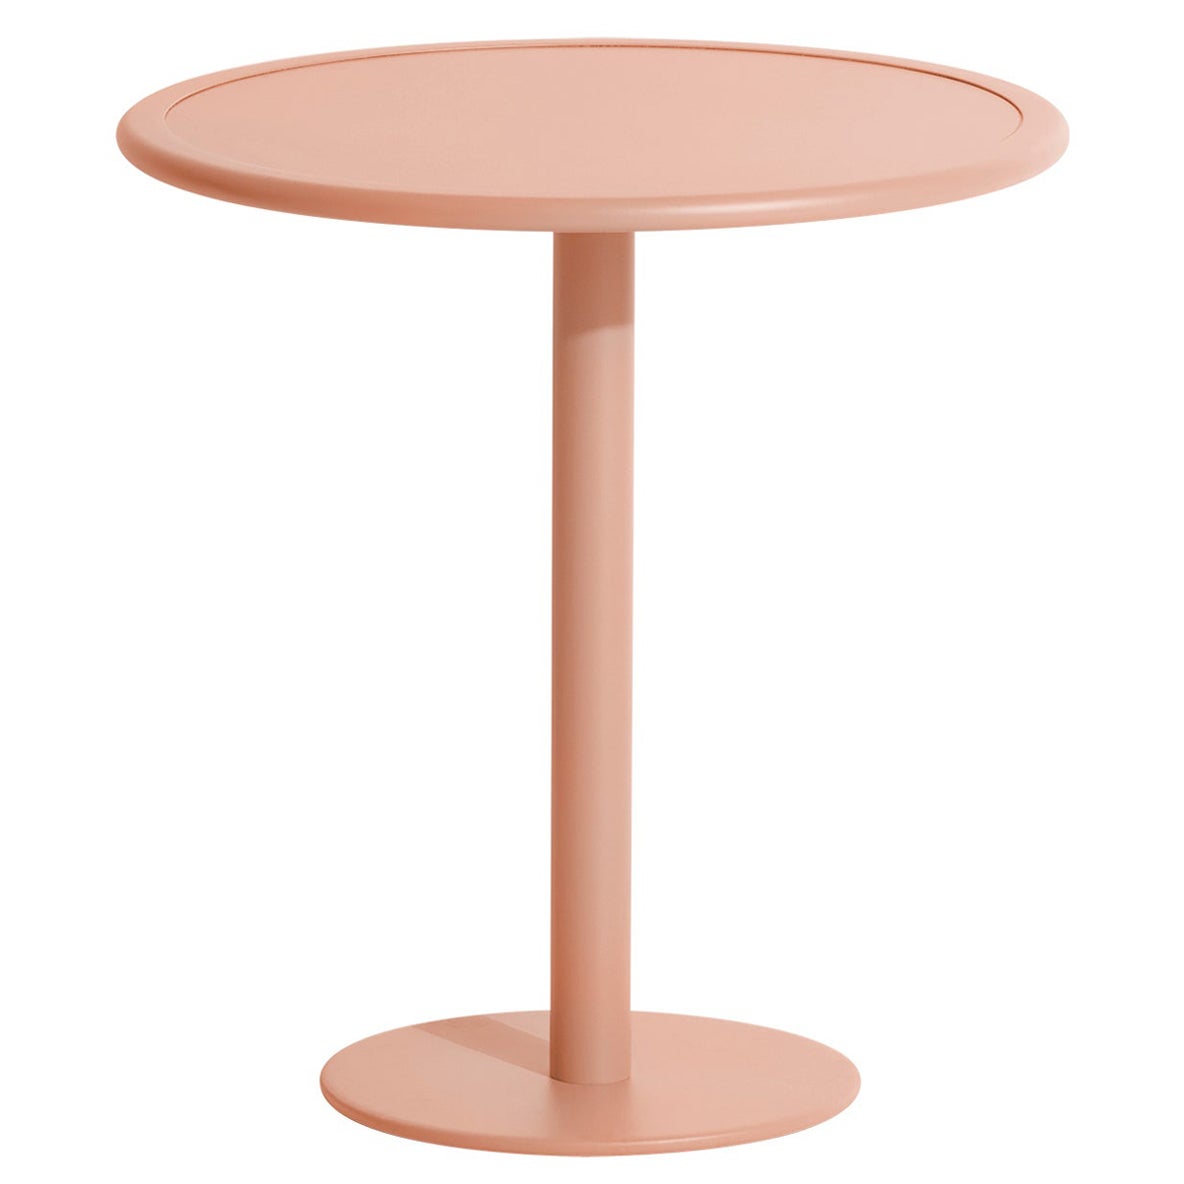 Petite Friture Week-End Bistro Round Dining Table in Blush Aluminium, 2017